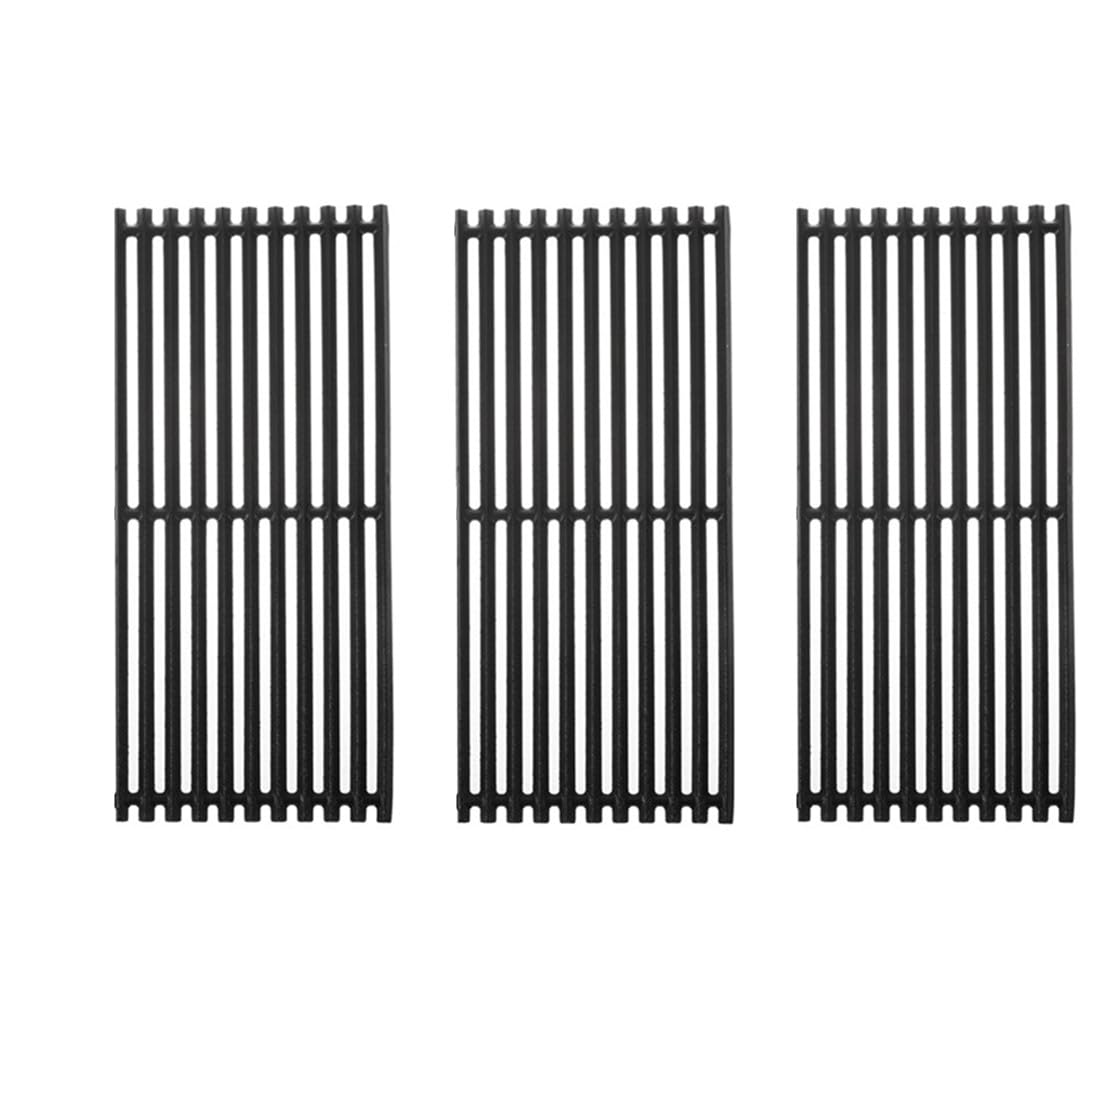 SafBbcue G466-0025-W1 Cooking Grates for Char-Broil Tru Infrared Grill Replacement Parts 463242515 463242516 463243016 463246018 463342420 463346017 463355220 466242515, Cast Iron 17" -Cast Iron